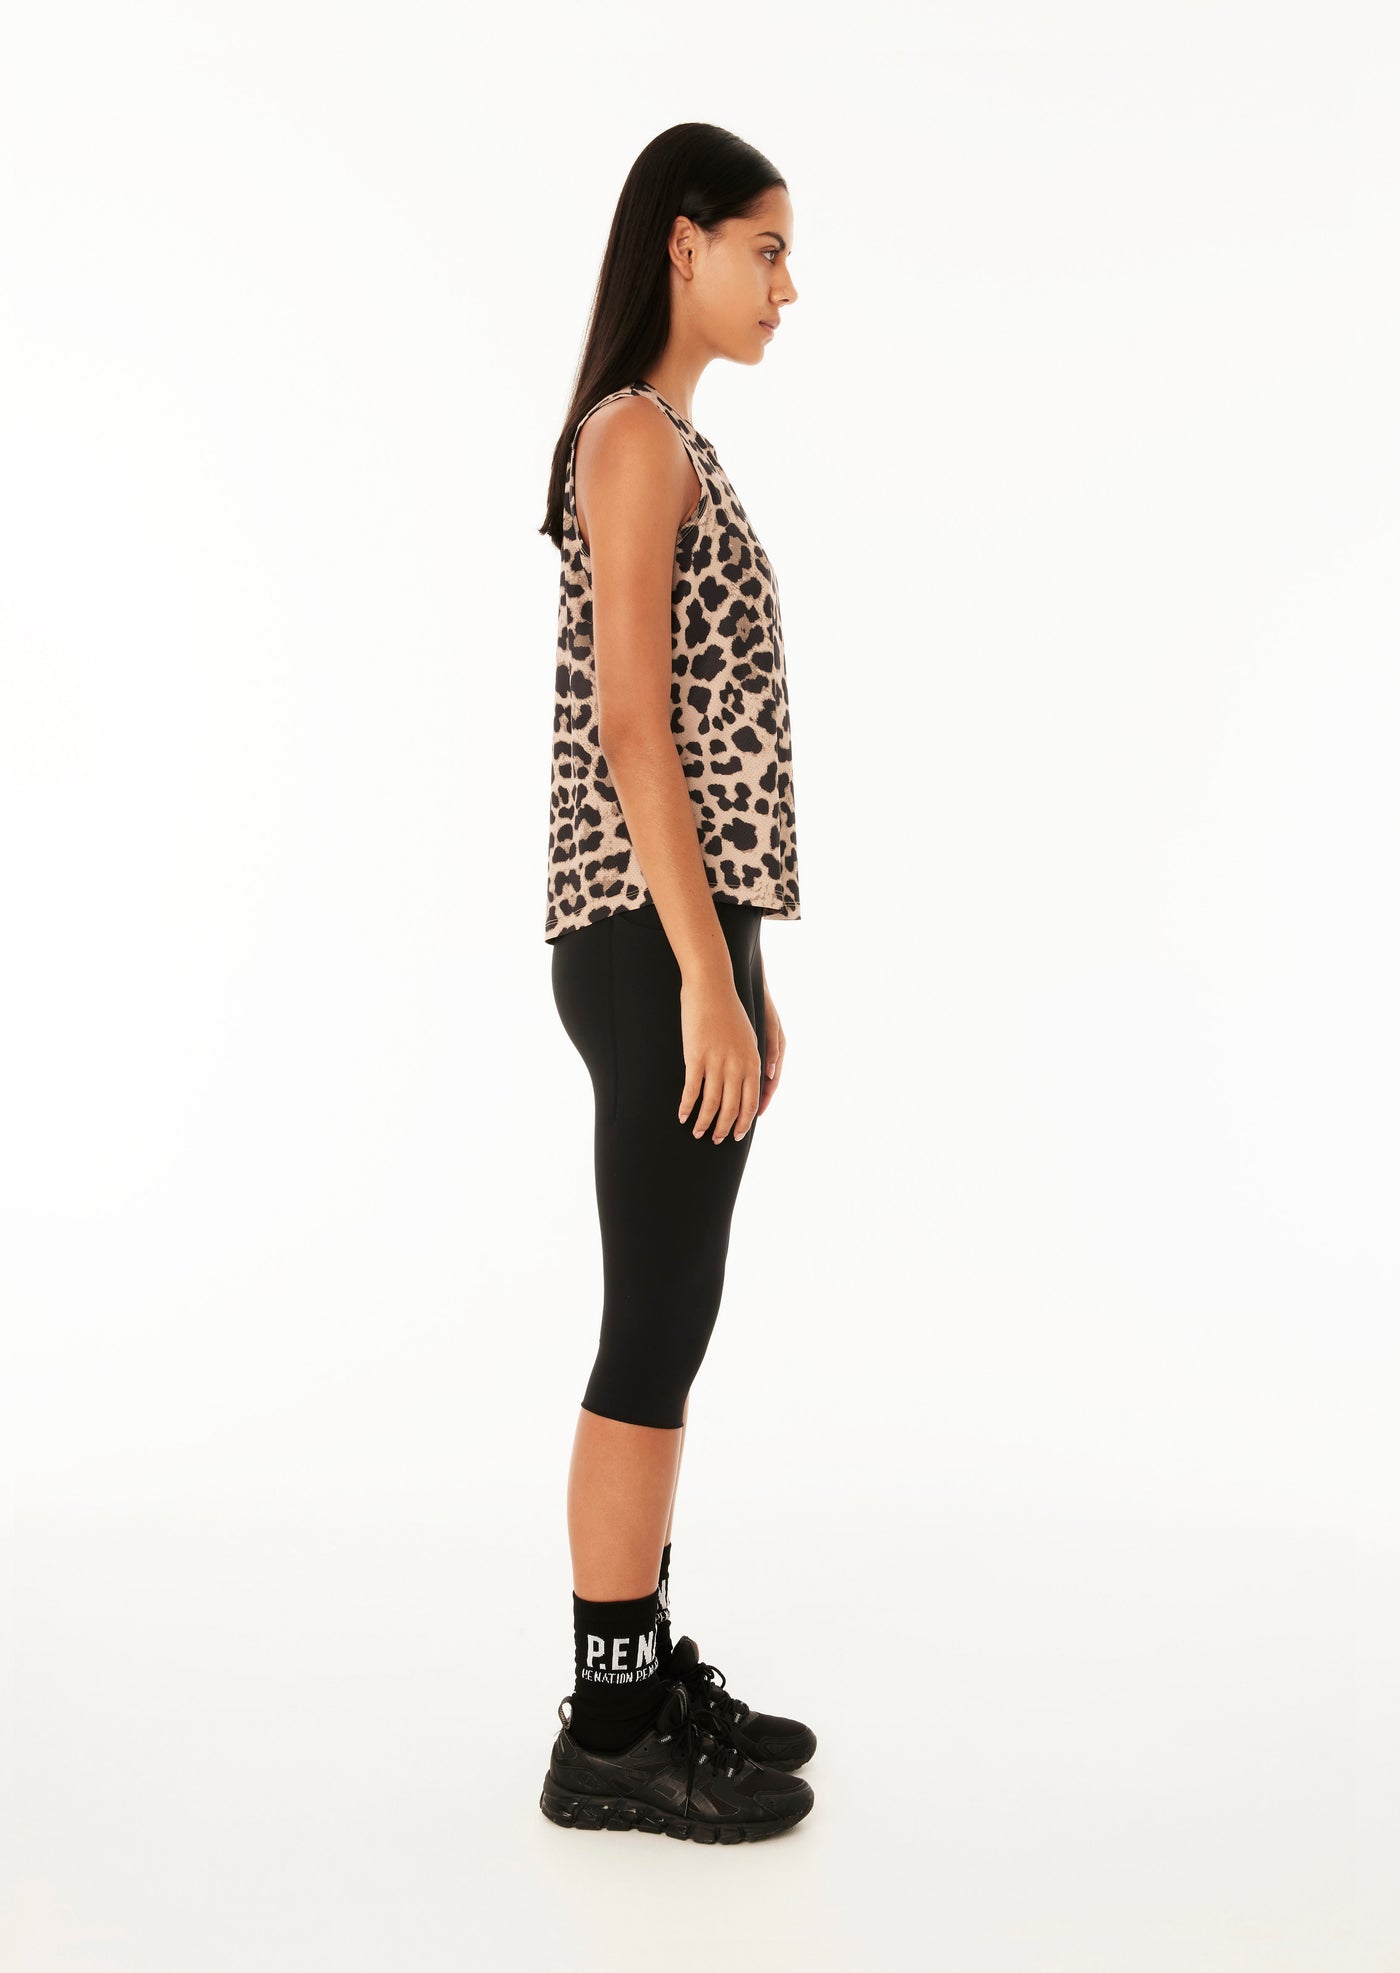 DOWNFORCE AIR FORM TANK IN ANIMAL PRINT